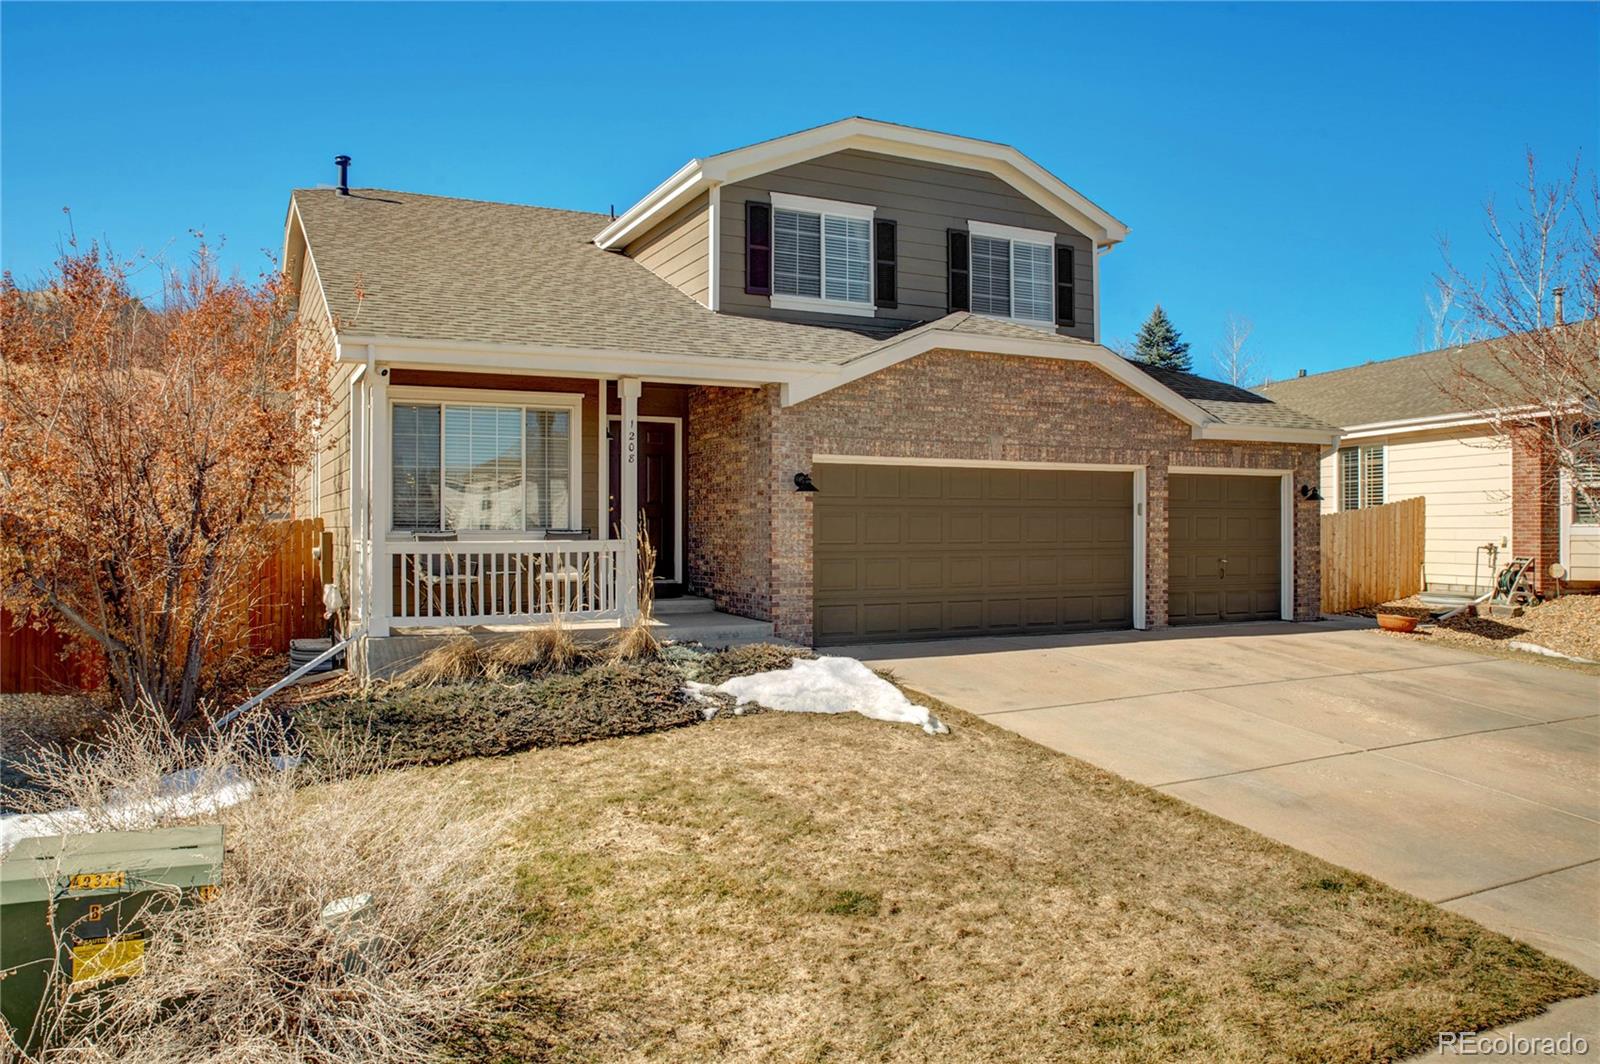 Report Image for 1208  Berganot Trail,Castle Pines, Colorado